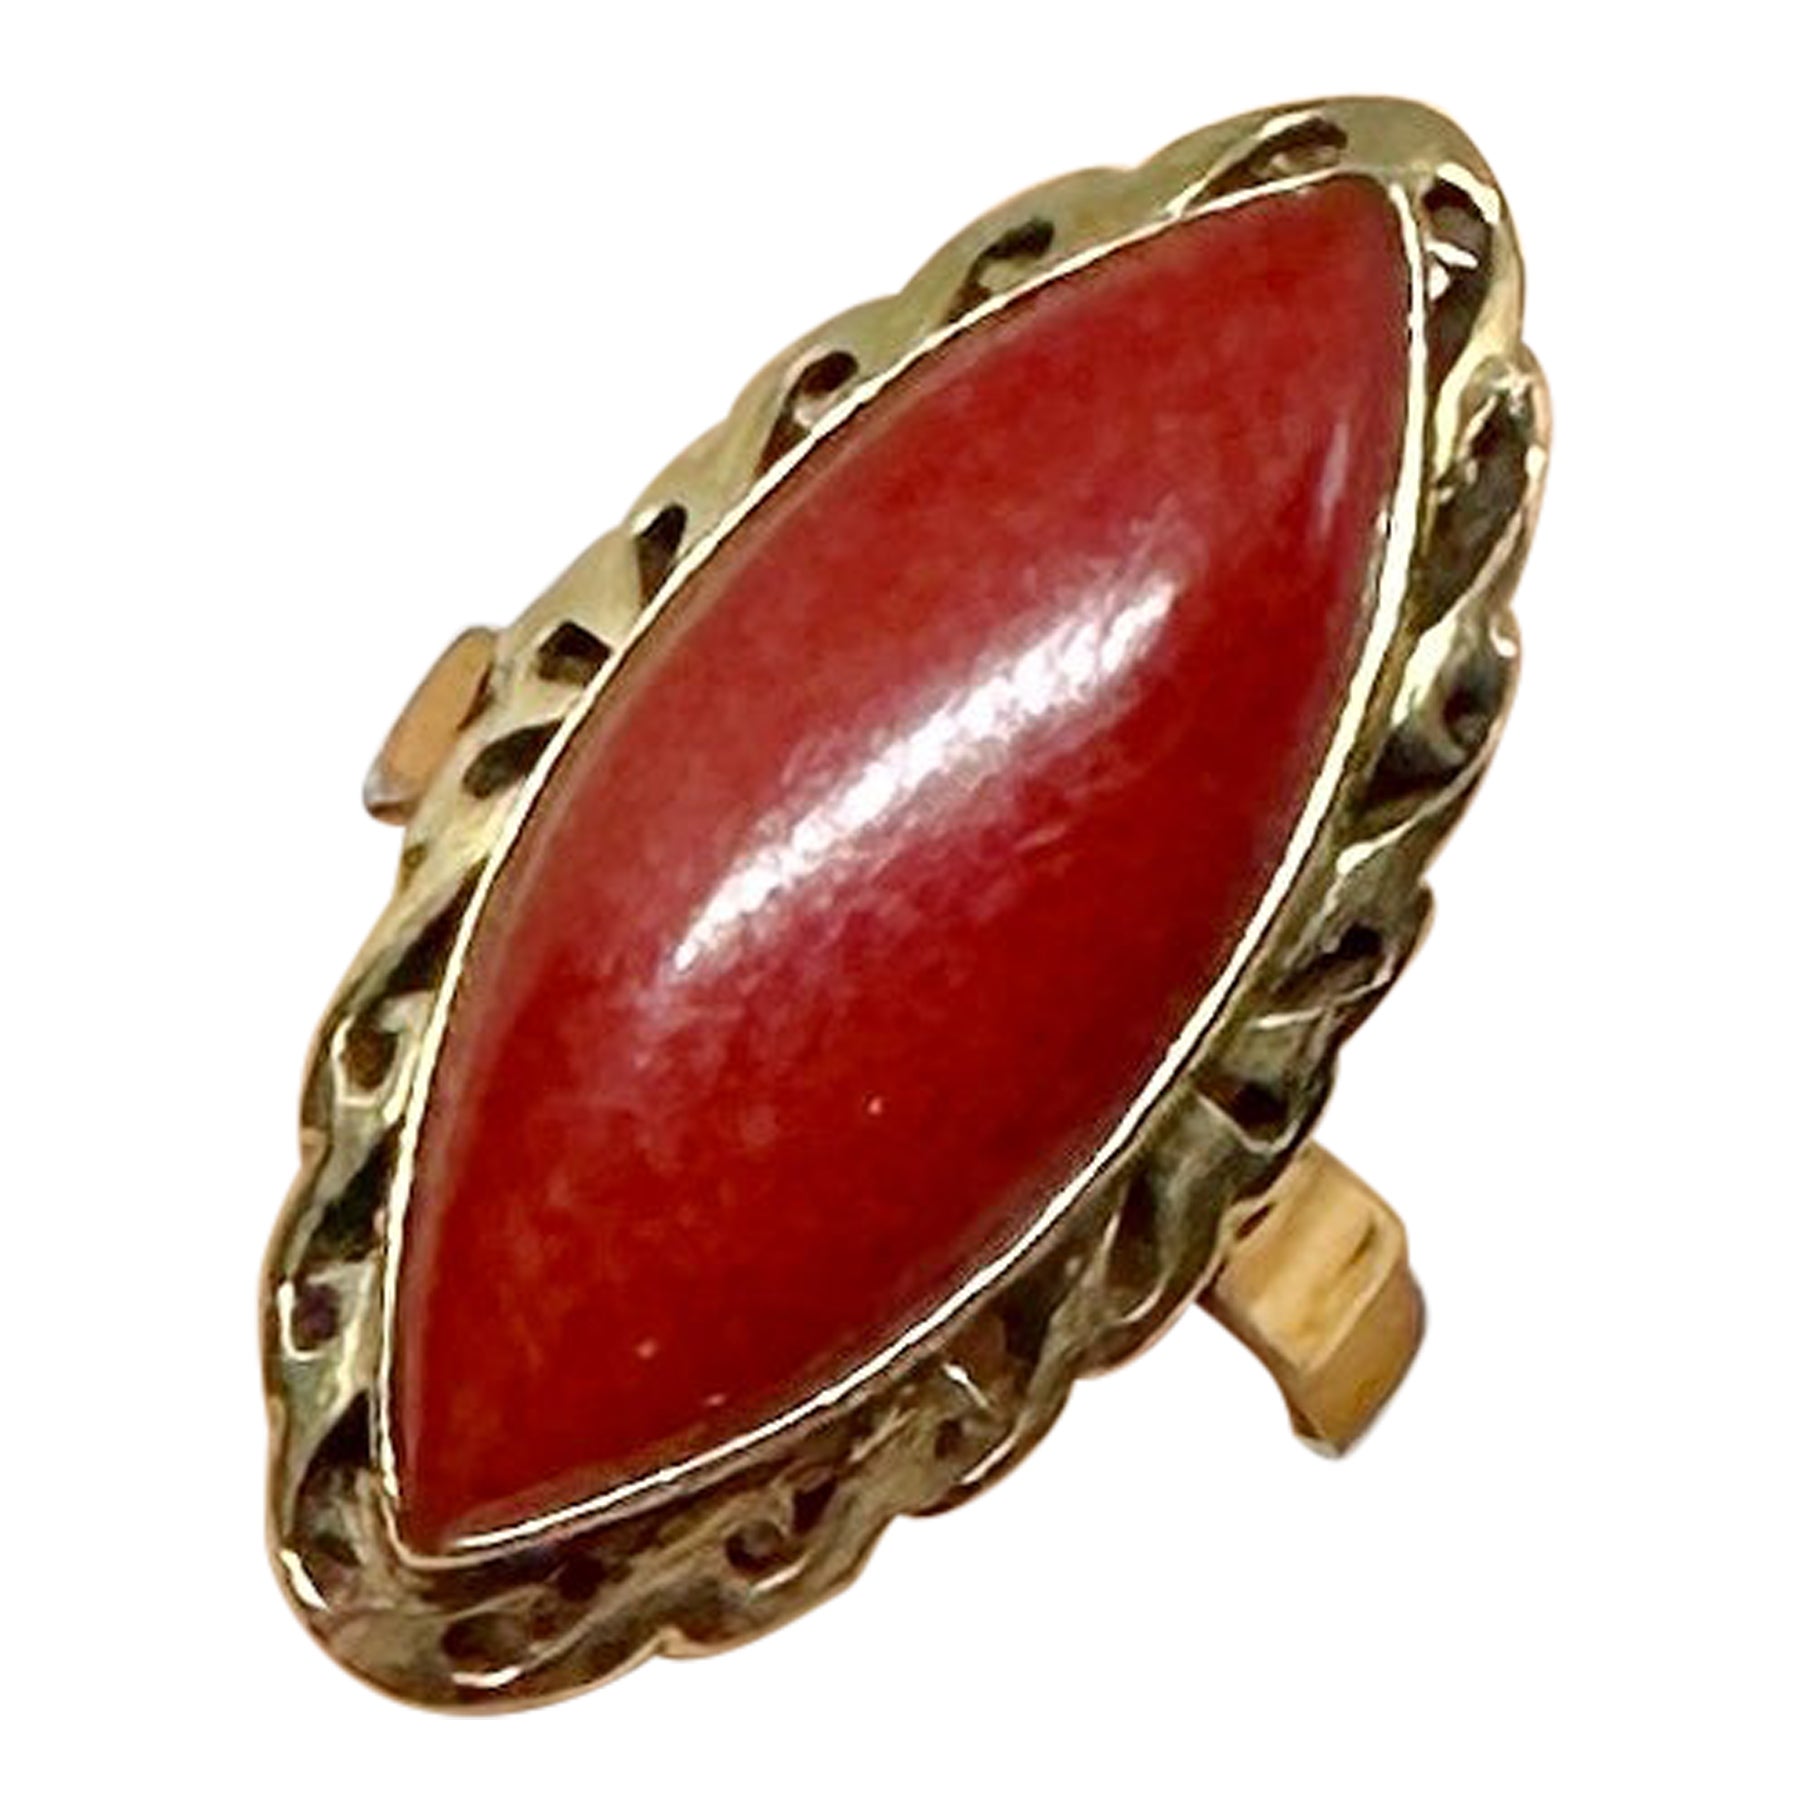 Art Deco Red Coral Ring 14 Karat Gold Navette Marquise Red Coral Cabochon